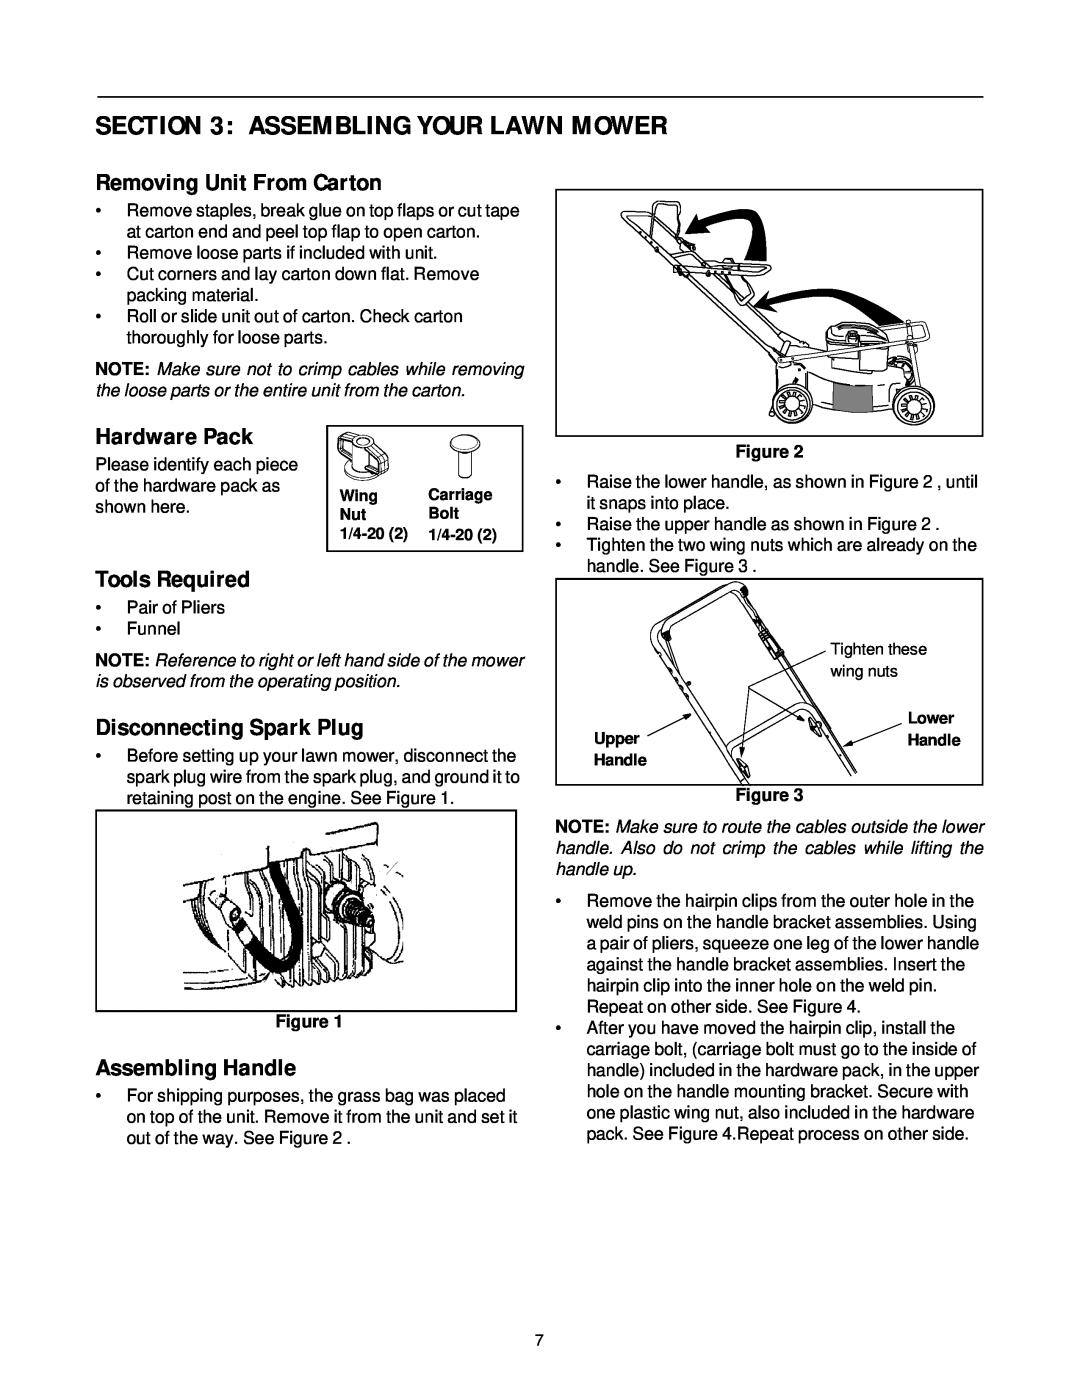 Yard-Man 437 manual Assembling Your Lawn Mower, Removing Unit From Carton, Hardware Pack, Tools Required, Assembling Handle 